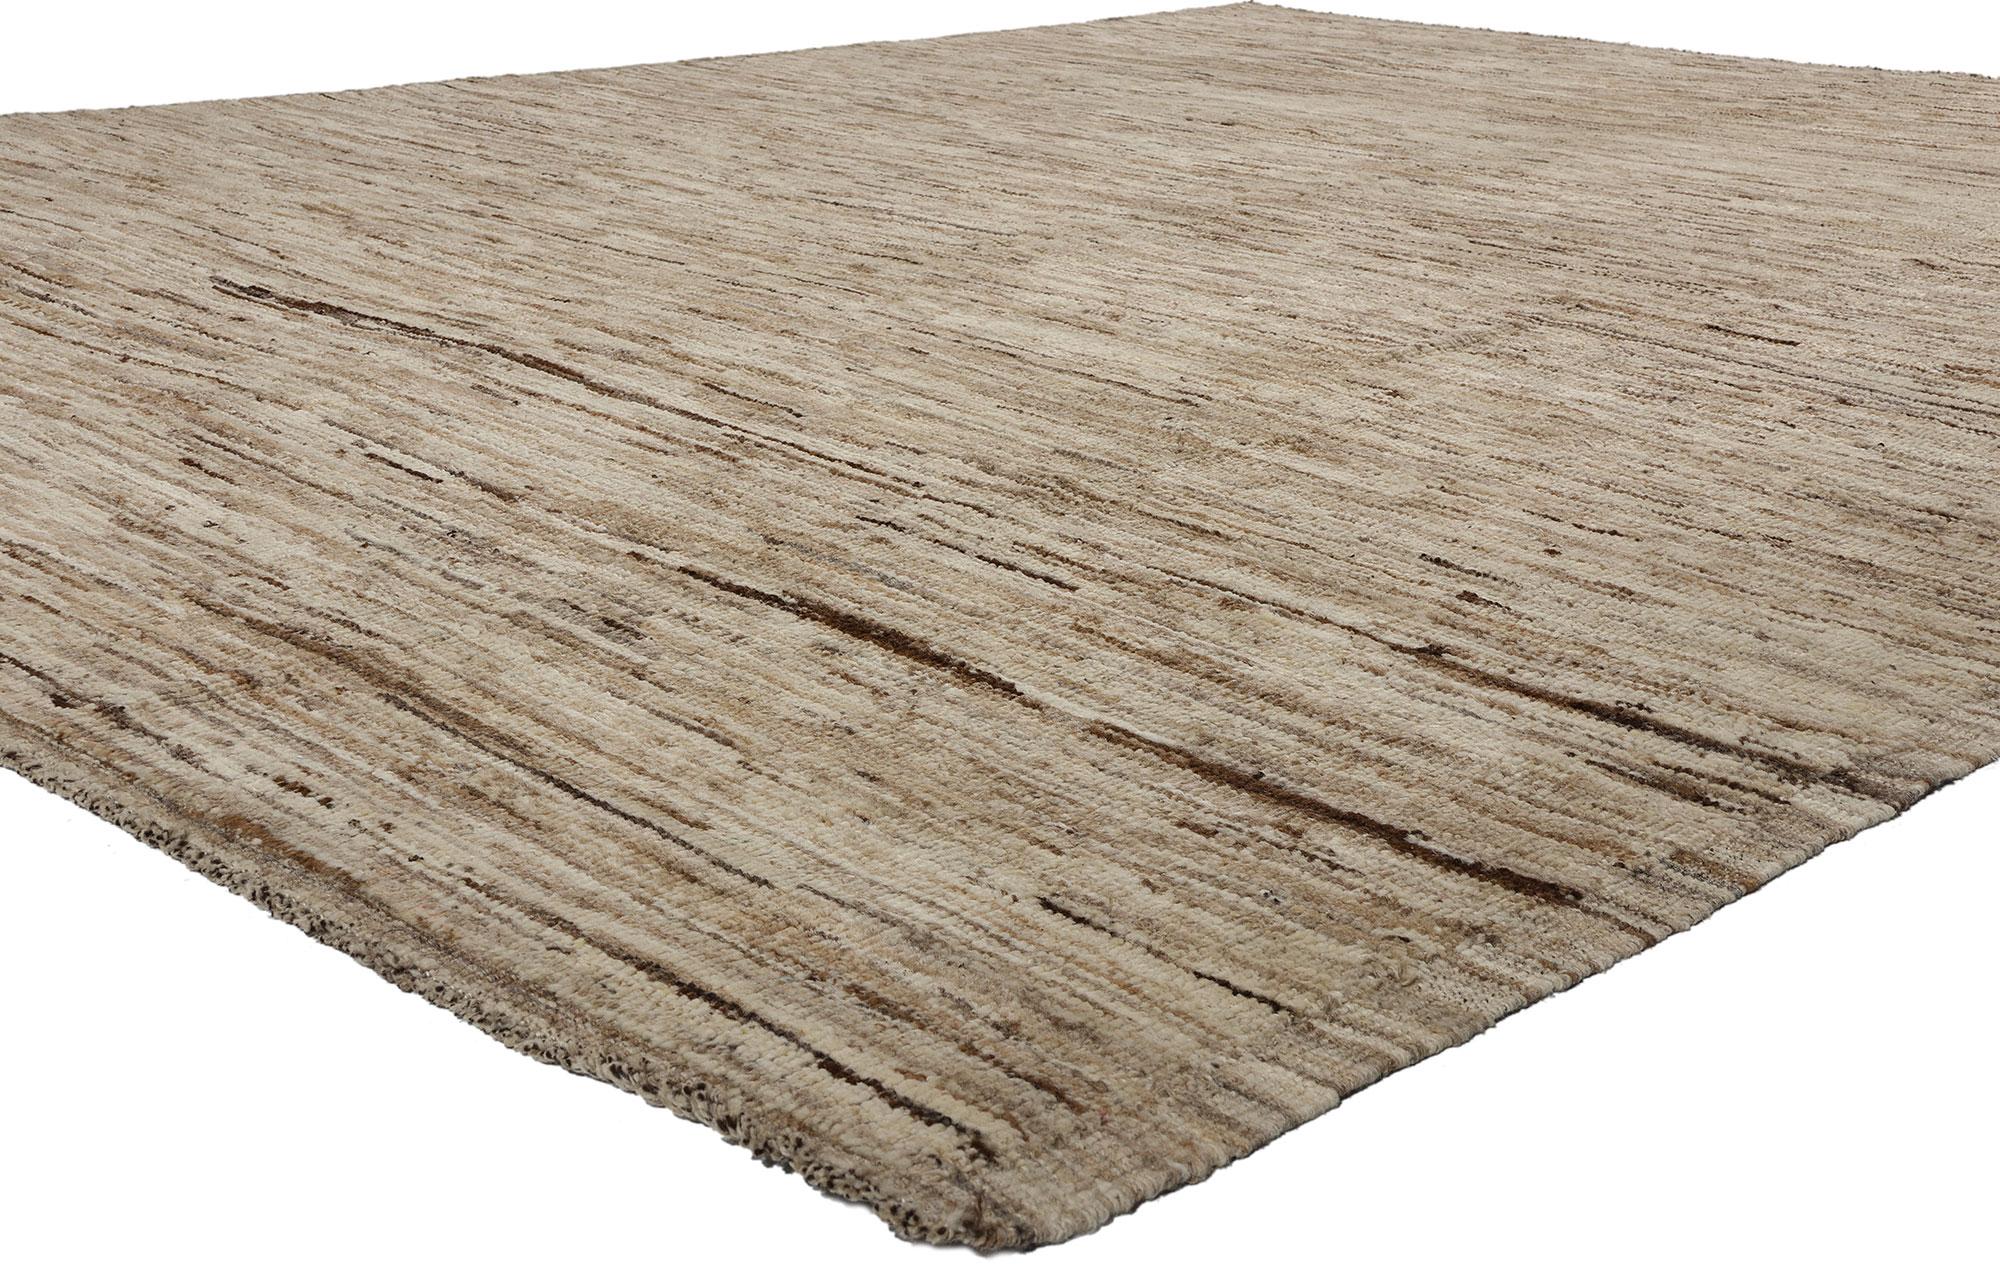 81088 Organic Modern Earth-Tone Moroccan Rug, 09'05 x 11'11. Step into a realm of refined elegance with our meticulously hand knotted wool earth-tone Moroccan area rug, a masterpiece of artistry and skill that harmonizes the enduring charm of